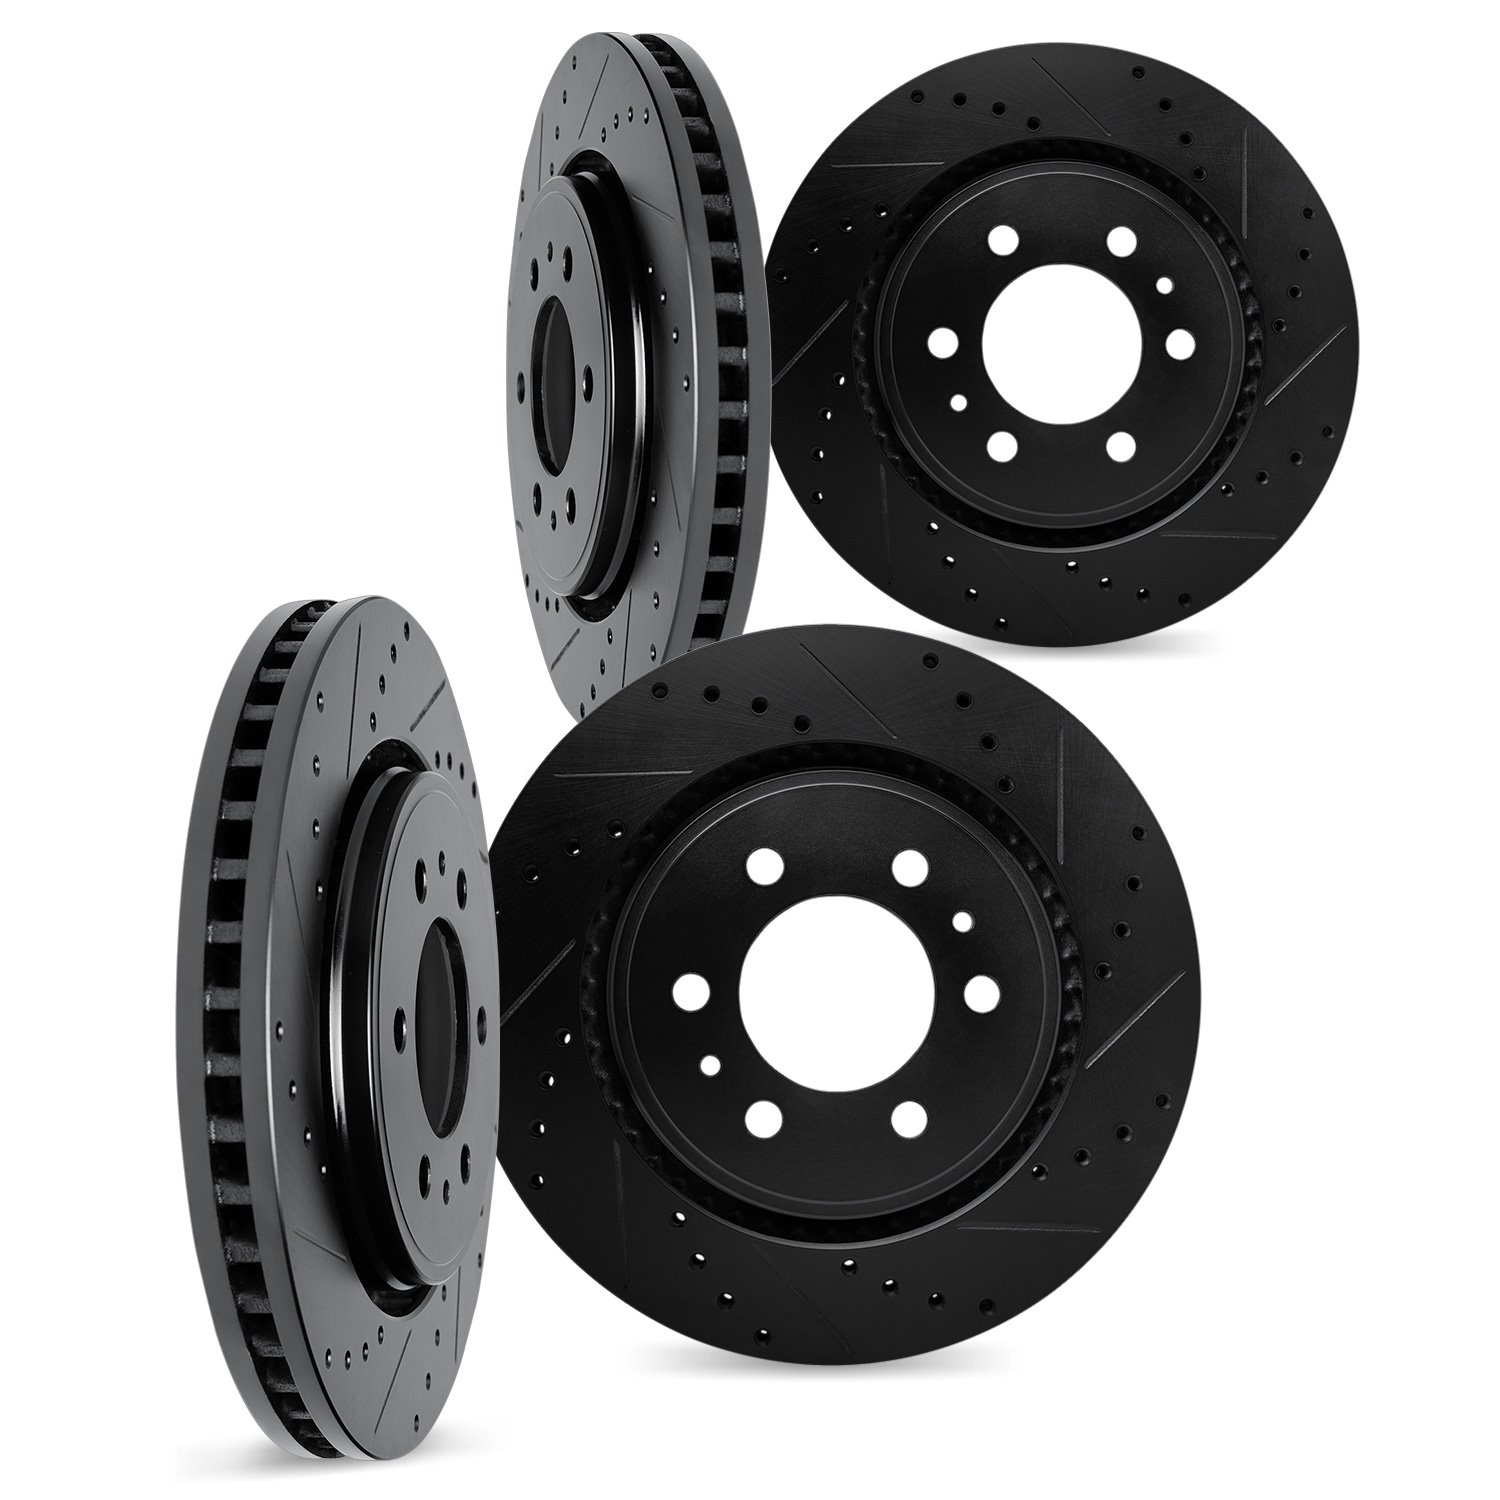 8004-76013 Drilled/Slotted Brake Rotors [Black], Fits Select Lexus/Toyota/Scion, Position: Front and Rear